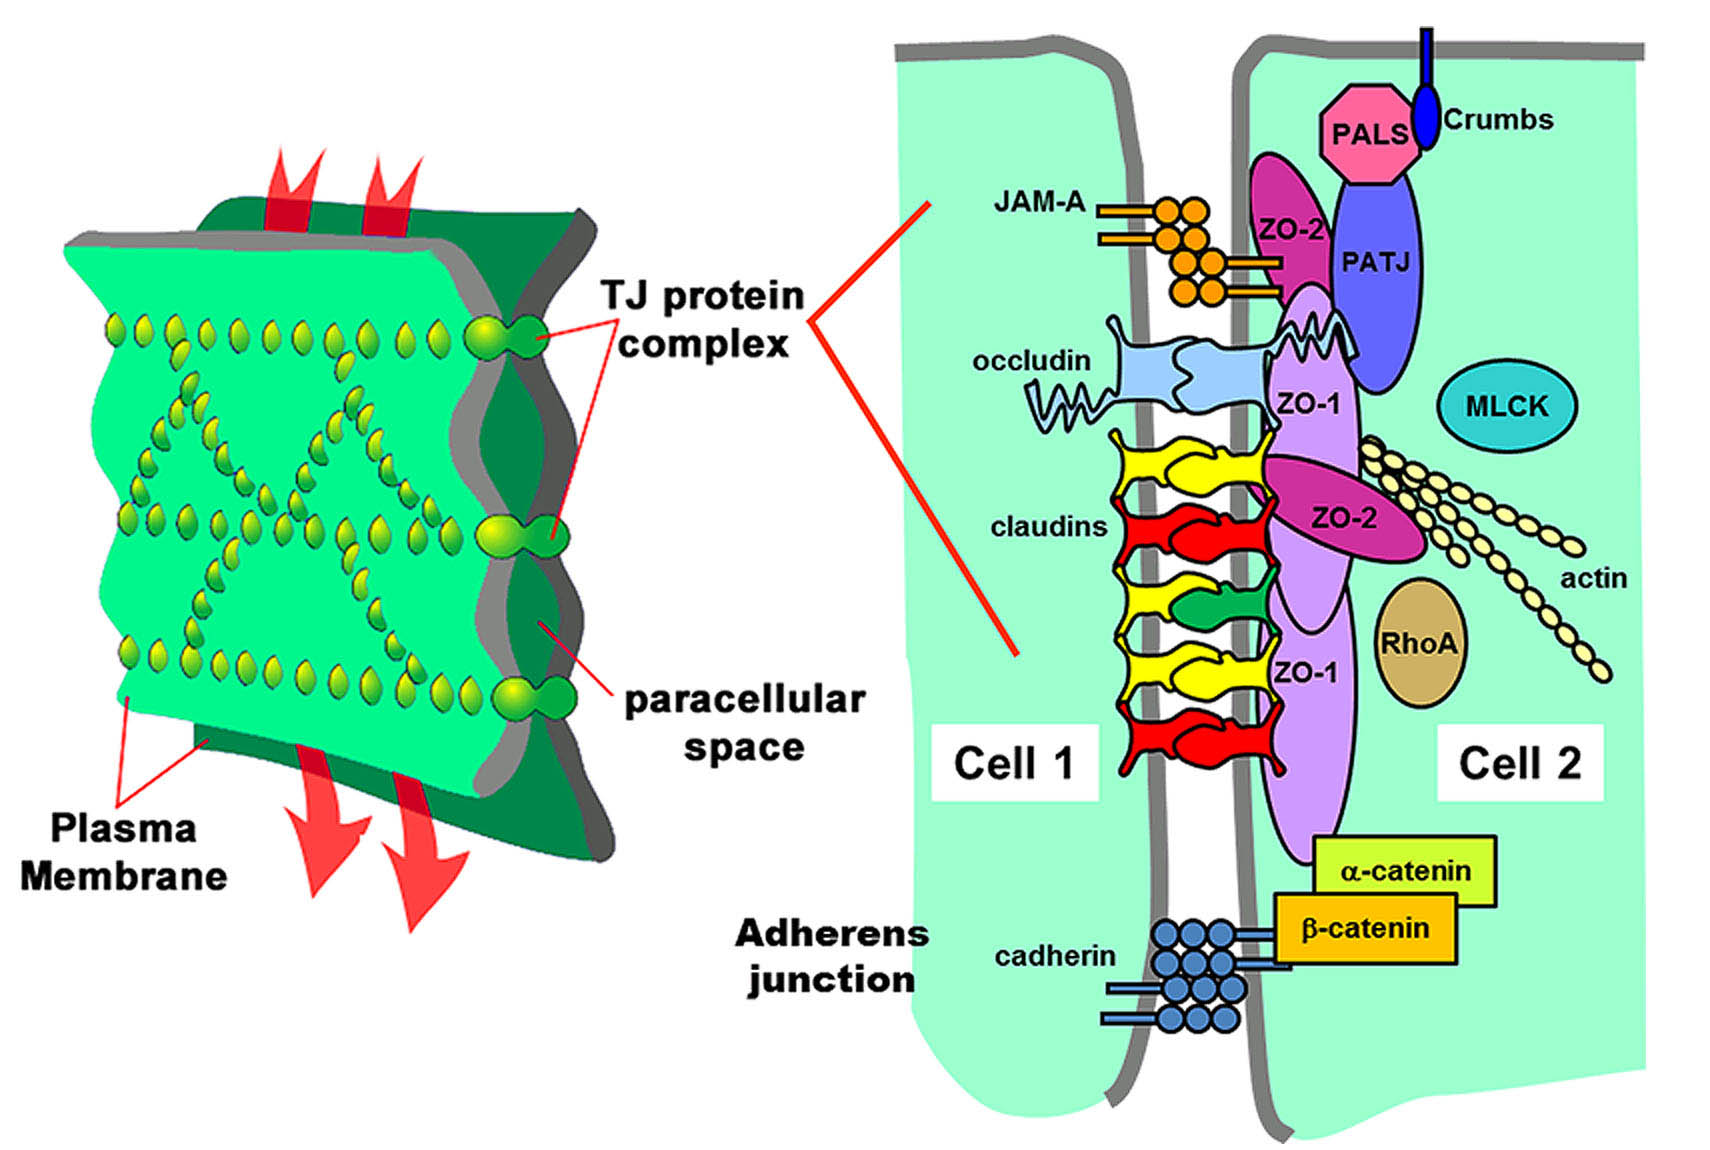 Junctions found at cell-cell contacts